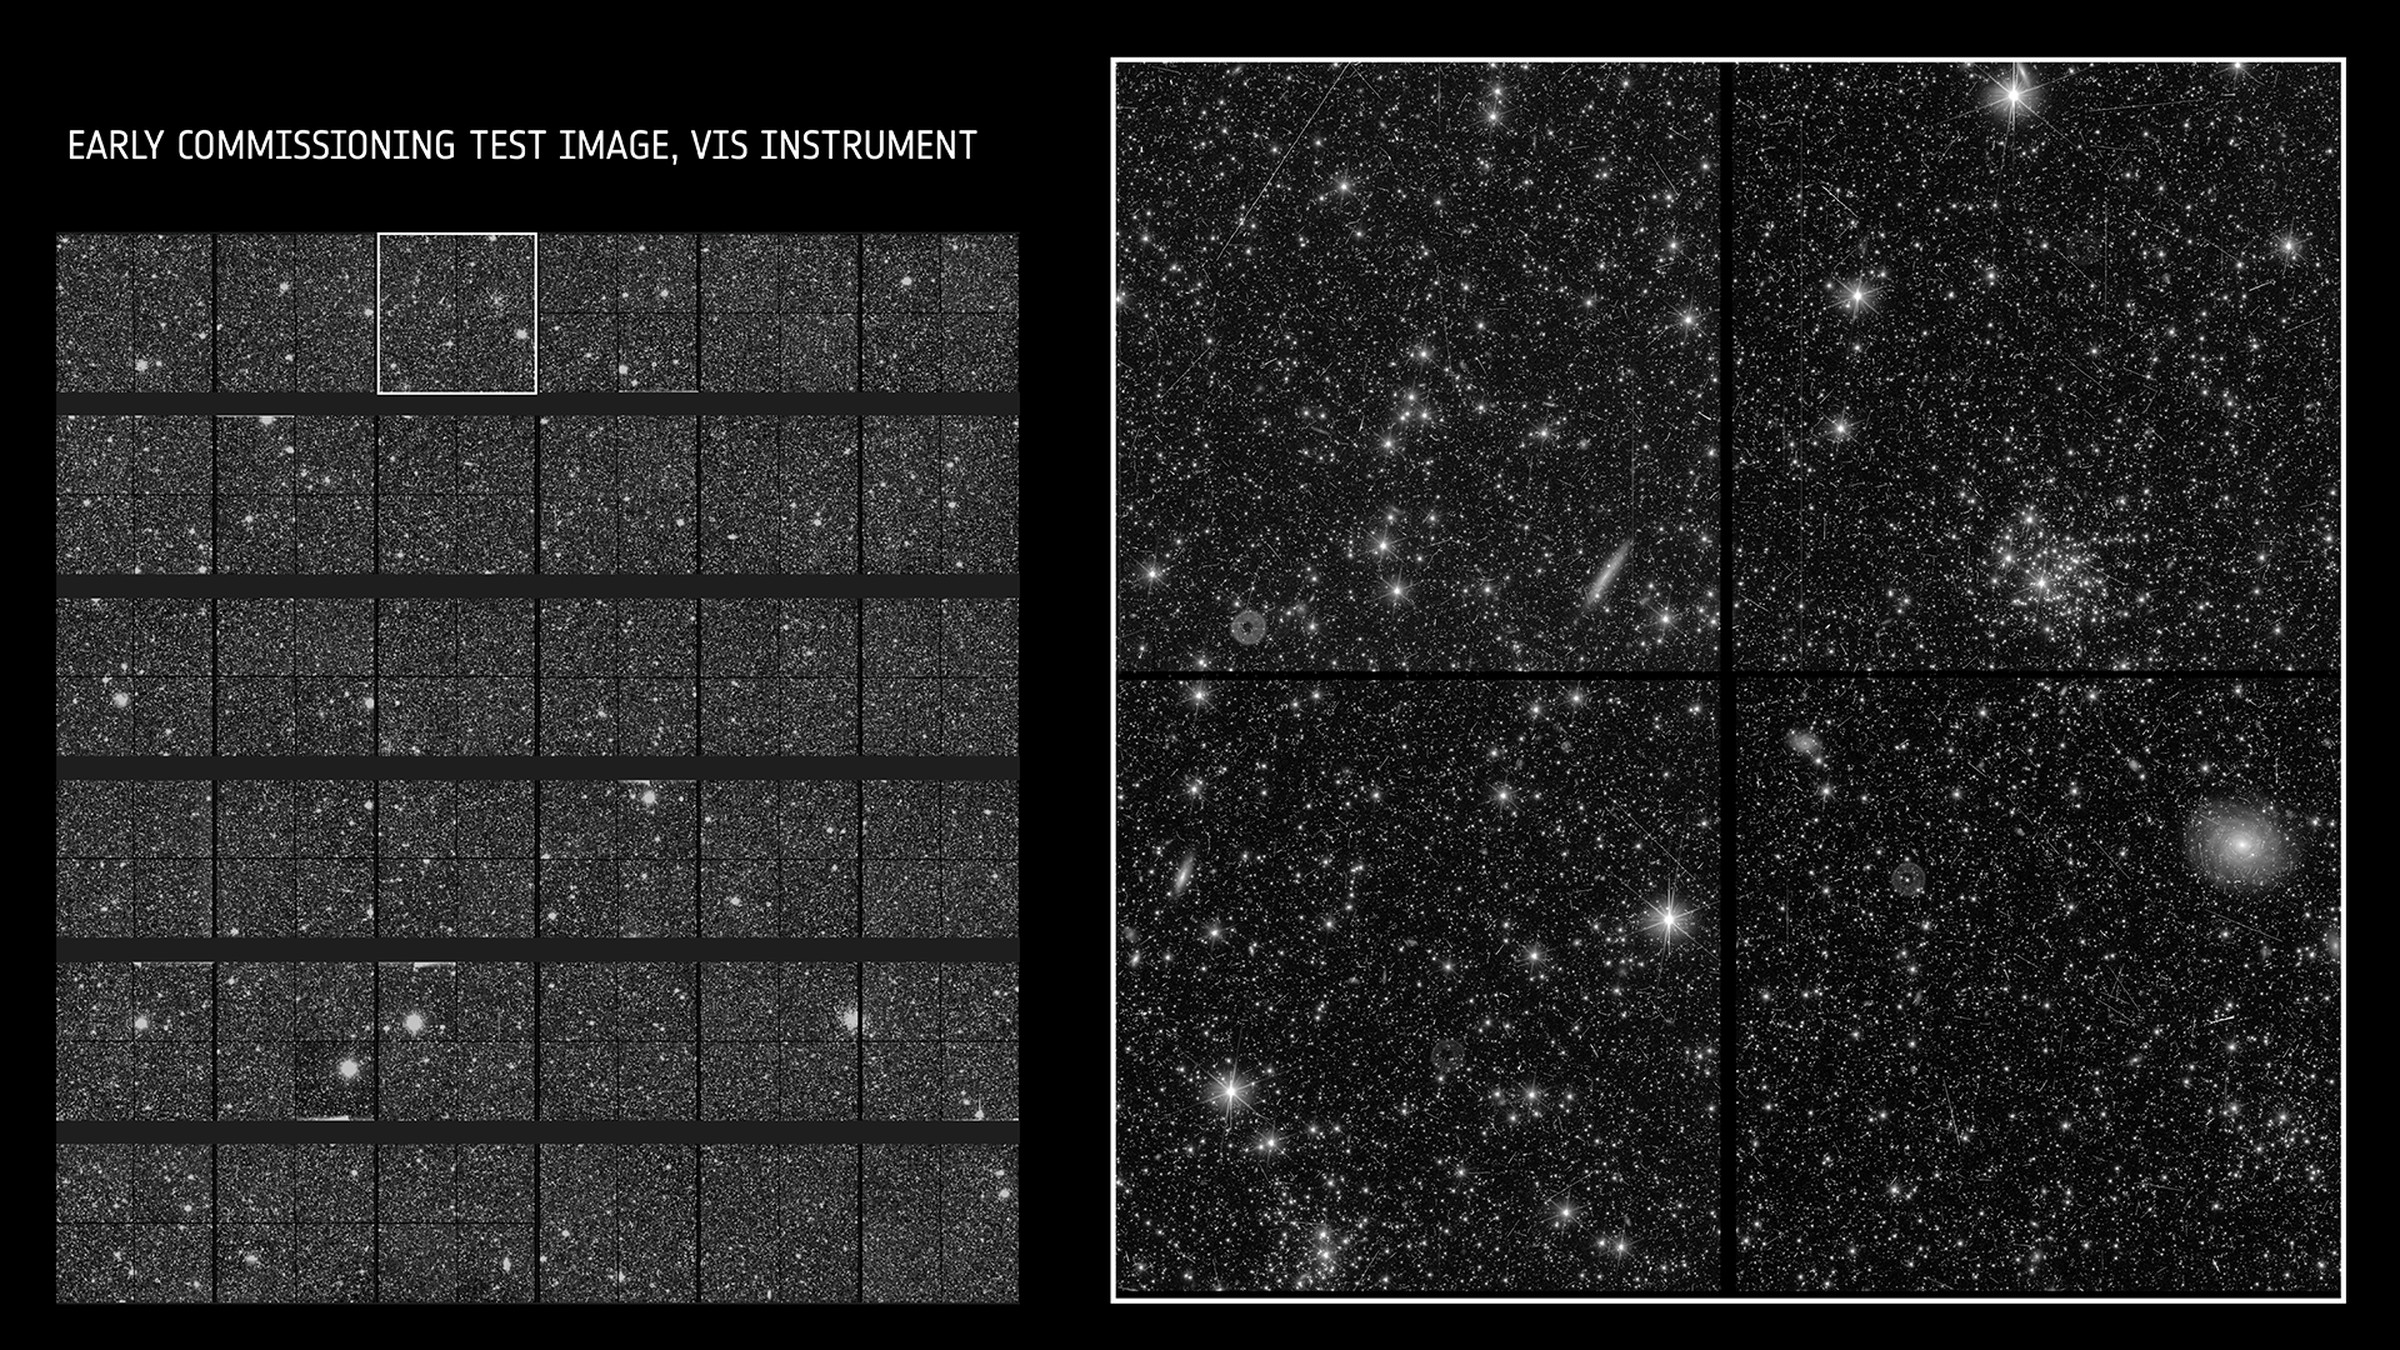 Early test images from Euclid’s VIS instrument. On the left, a grid of image thumbnails. On the right, an enlarged grid of four of the pictures, showing vast starfields, galaxies, and star clusters.